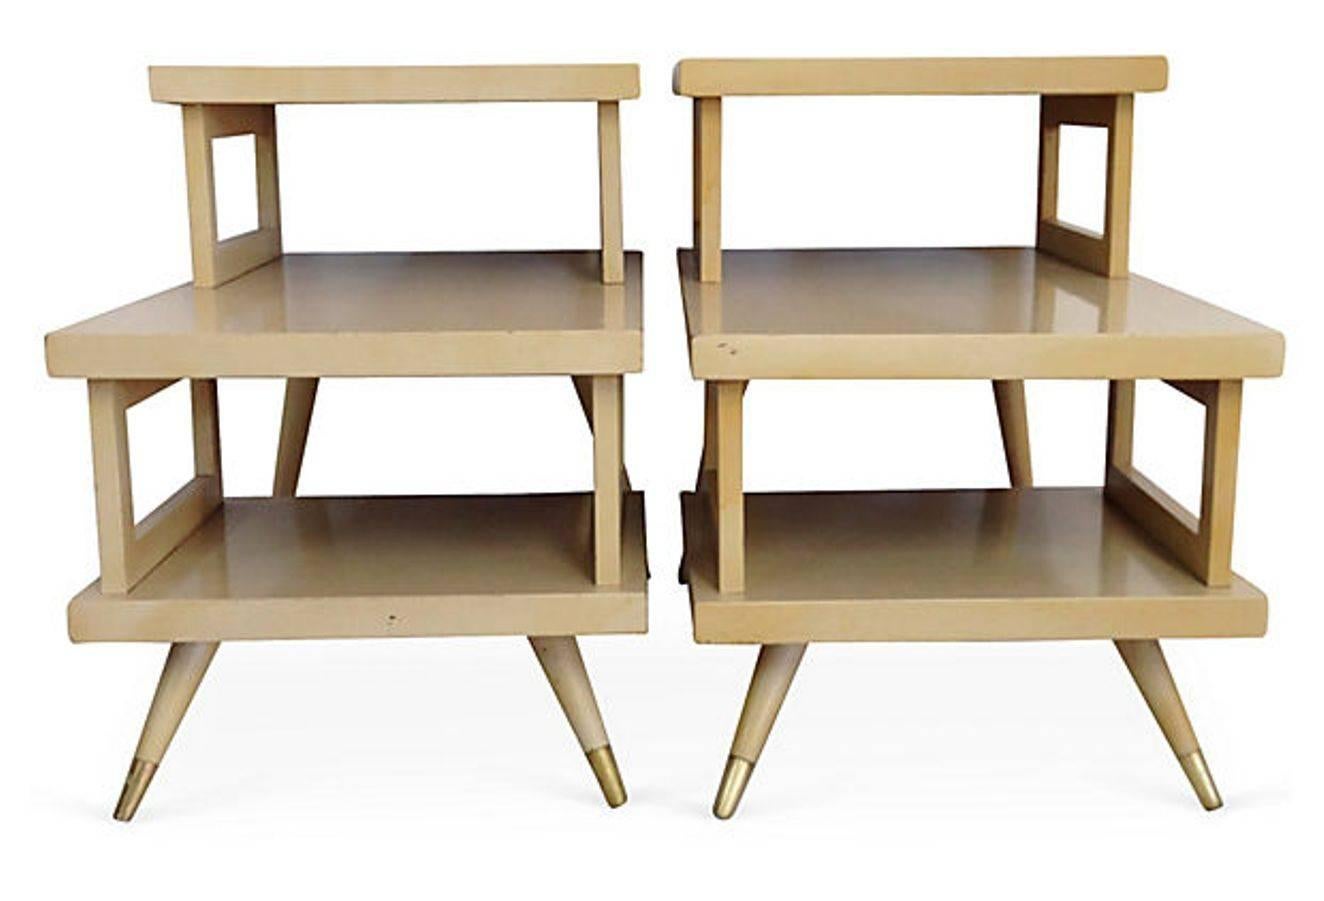 Quintessential & Rare Pair Of of Mid-Century Modern blonde three tier side tables with brass ferrule feet. Made of blonde wood, each top is laminated formica in high gloss finish